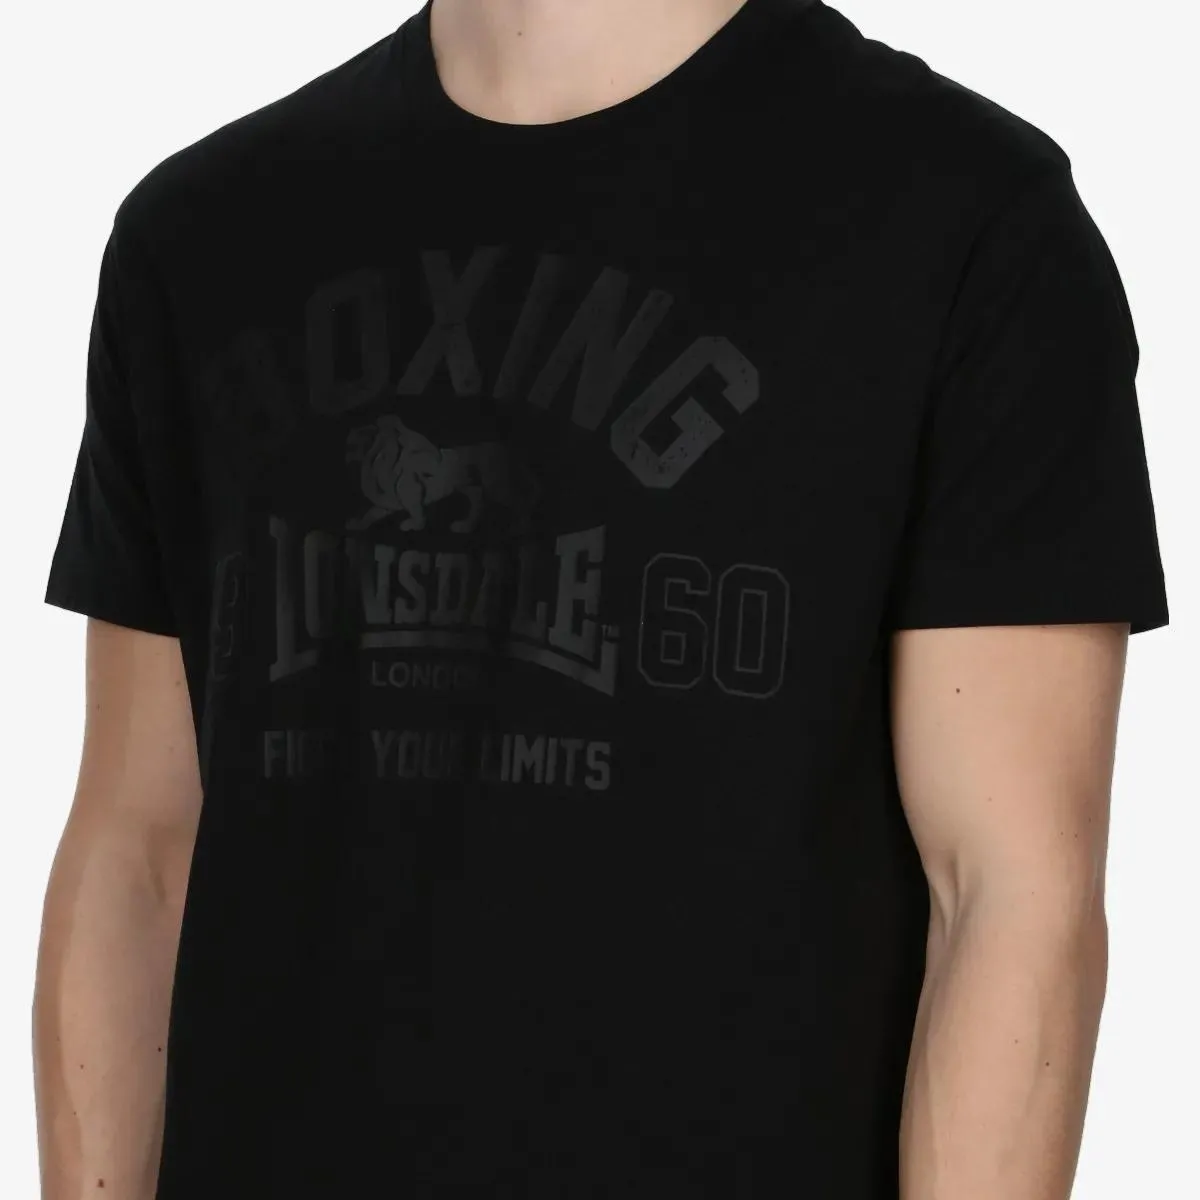 Lonsdale T-shirt Boxing 